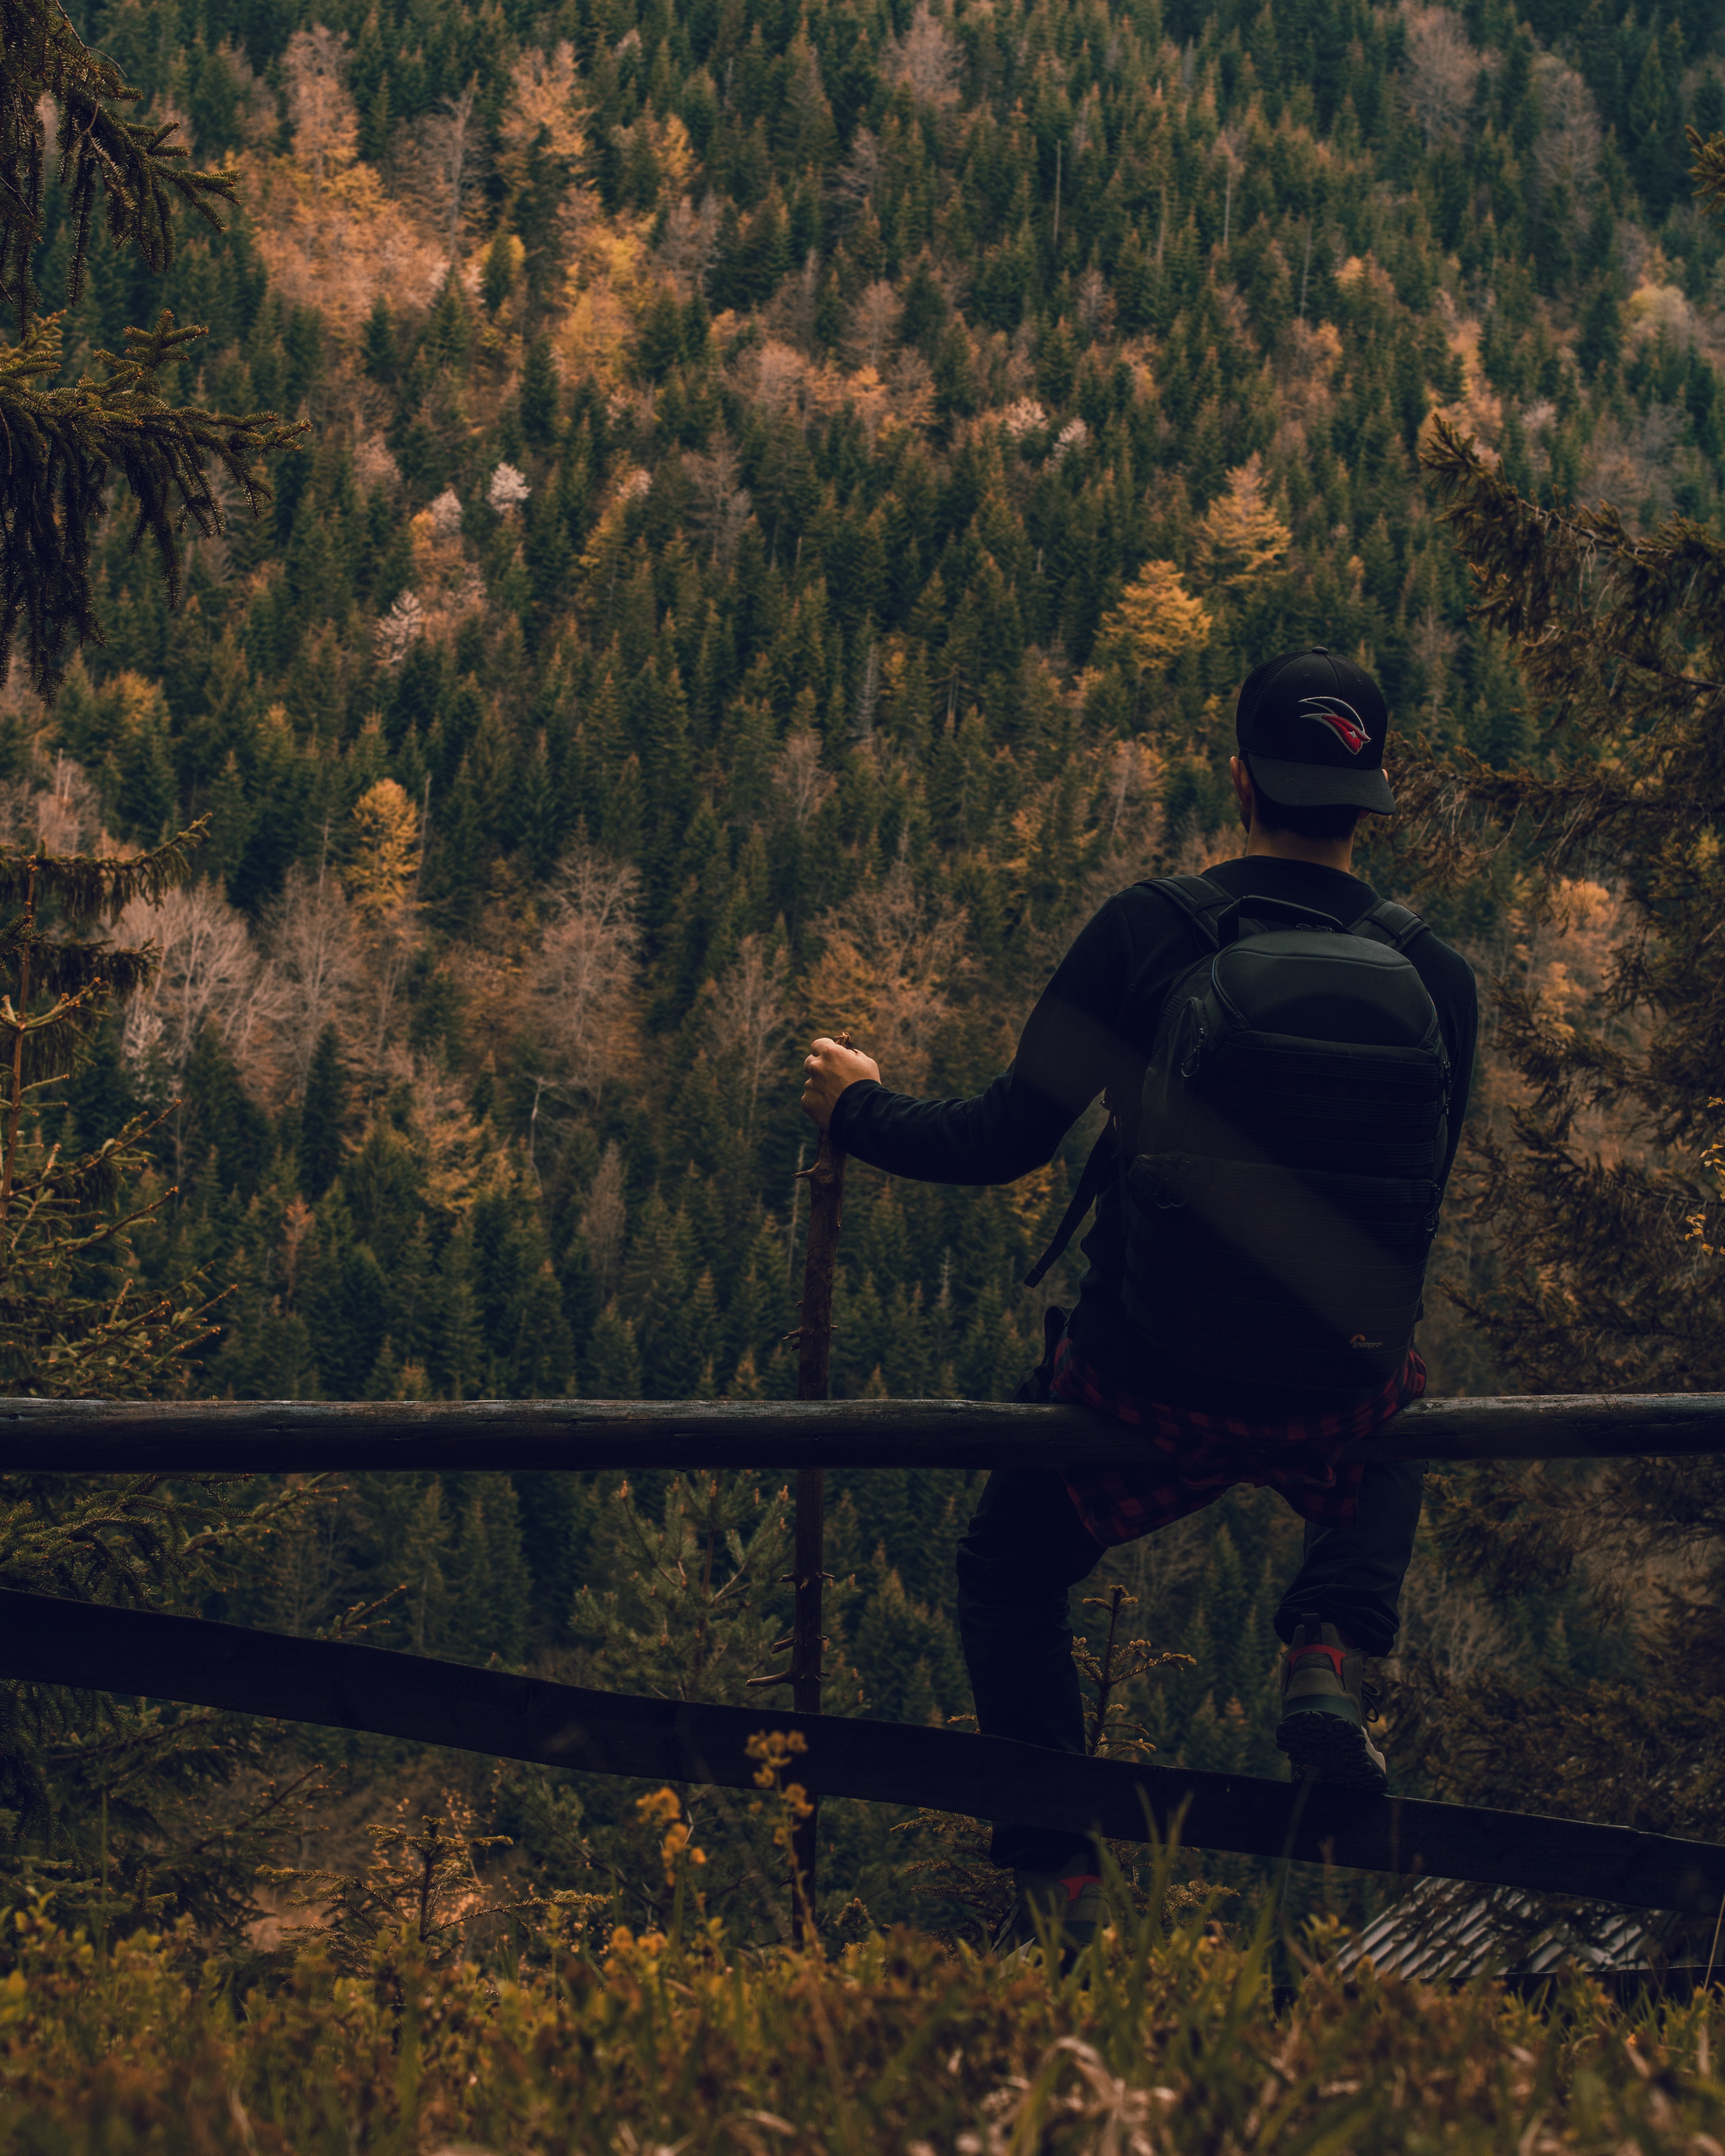 person, campaign, nature, miscellanea, miscellaneous, forest, human, backpack, rucksack, hike